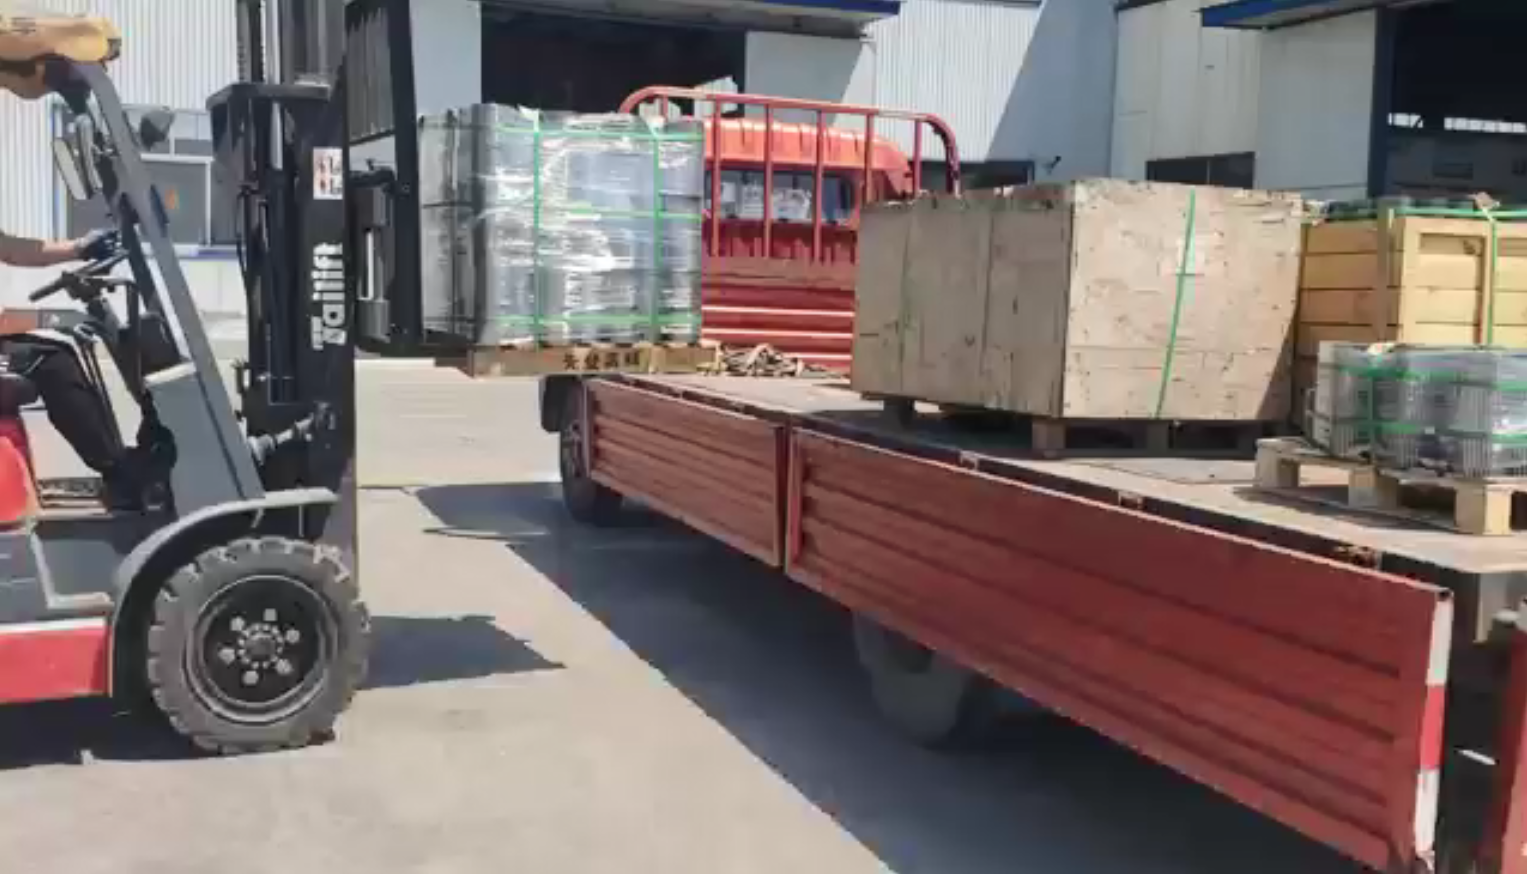 Motor stator and rotator steel core to be loaded for delivery